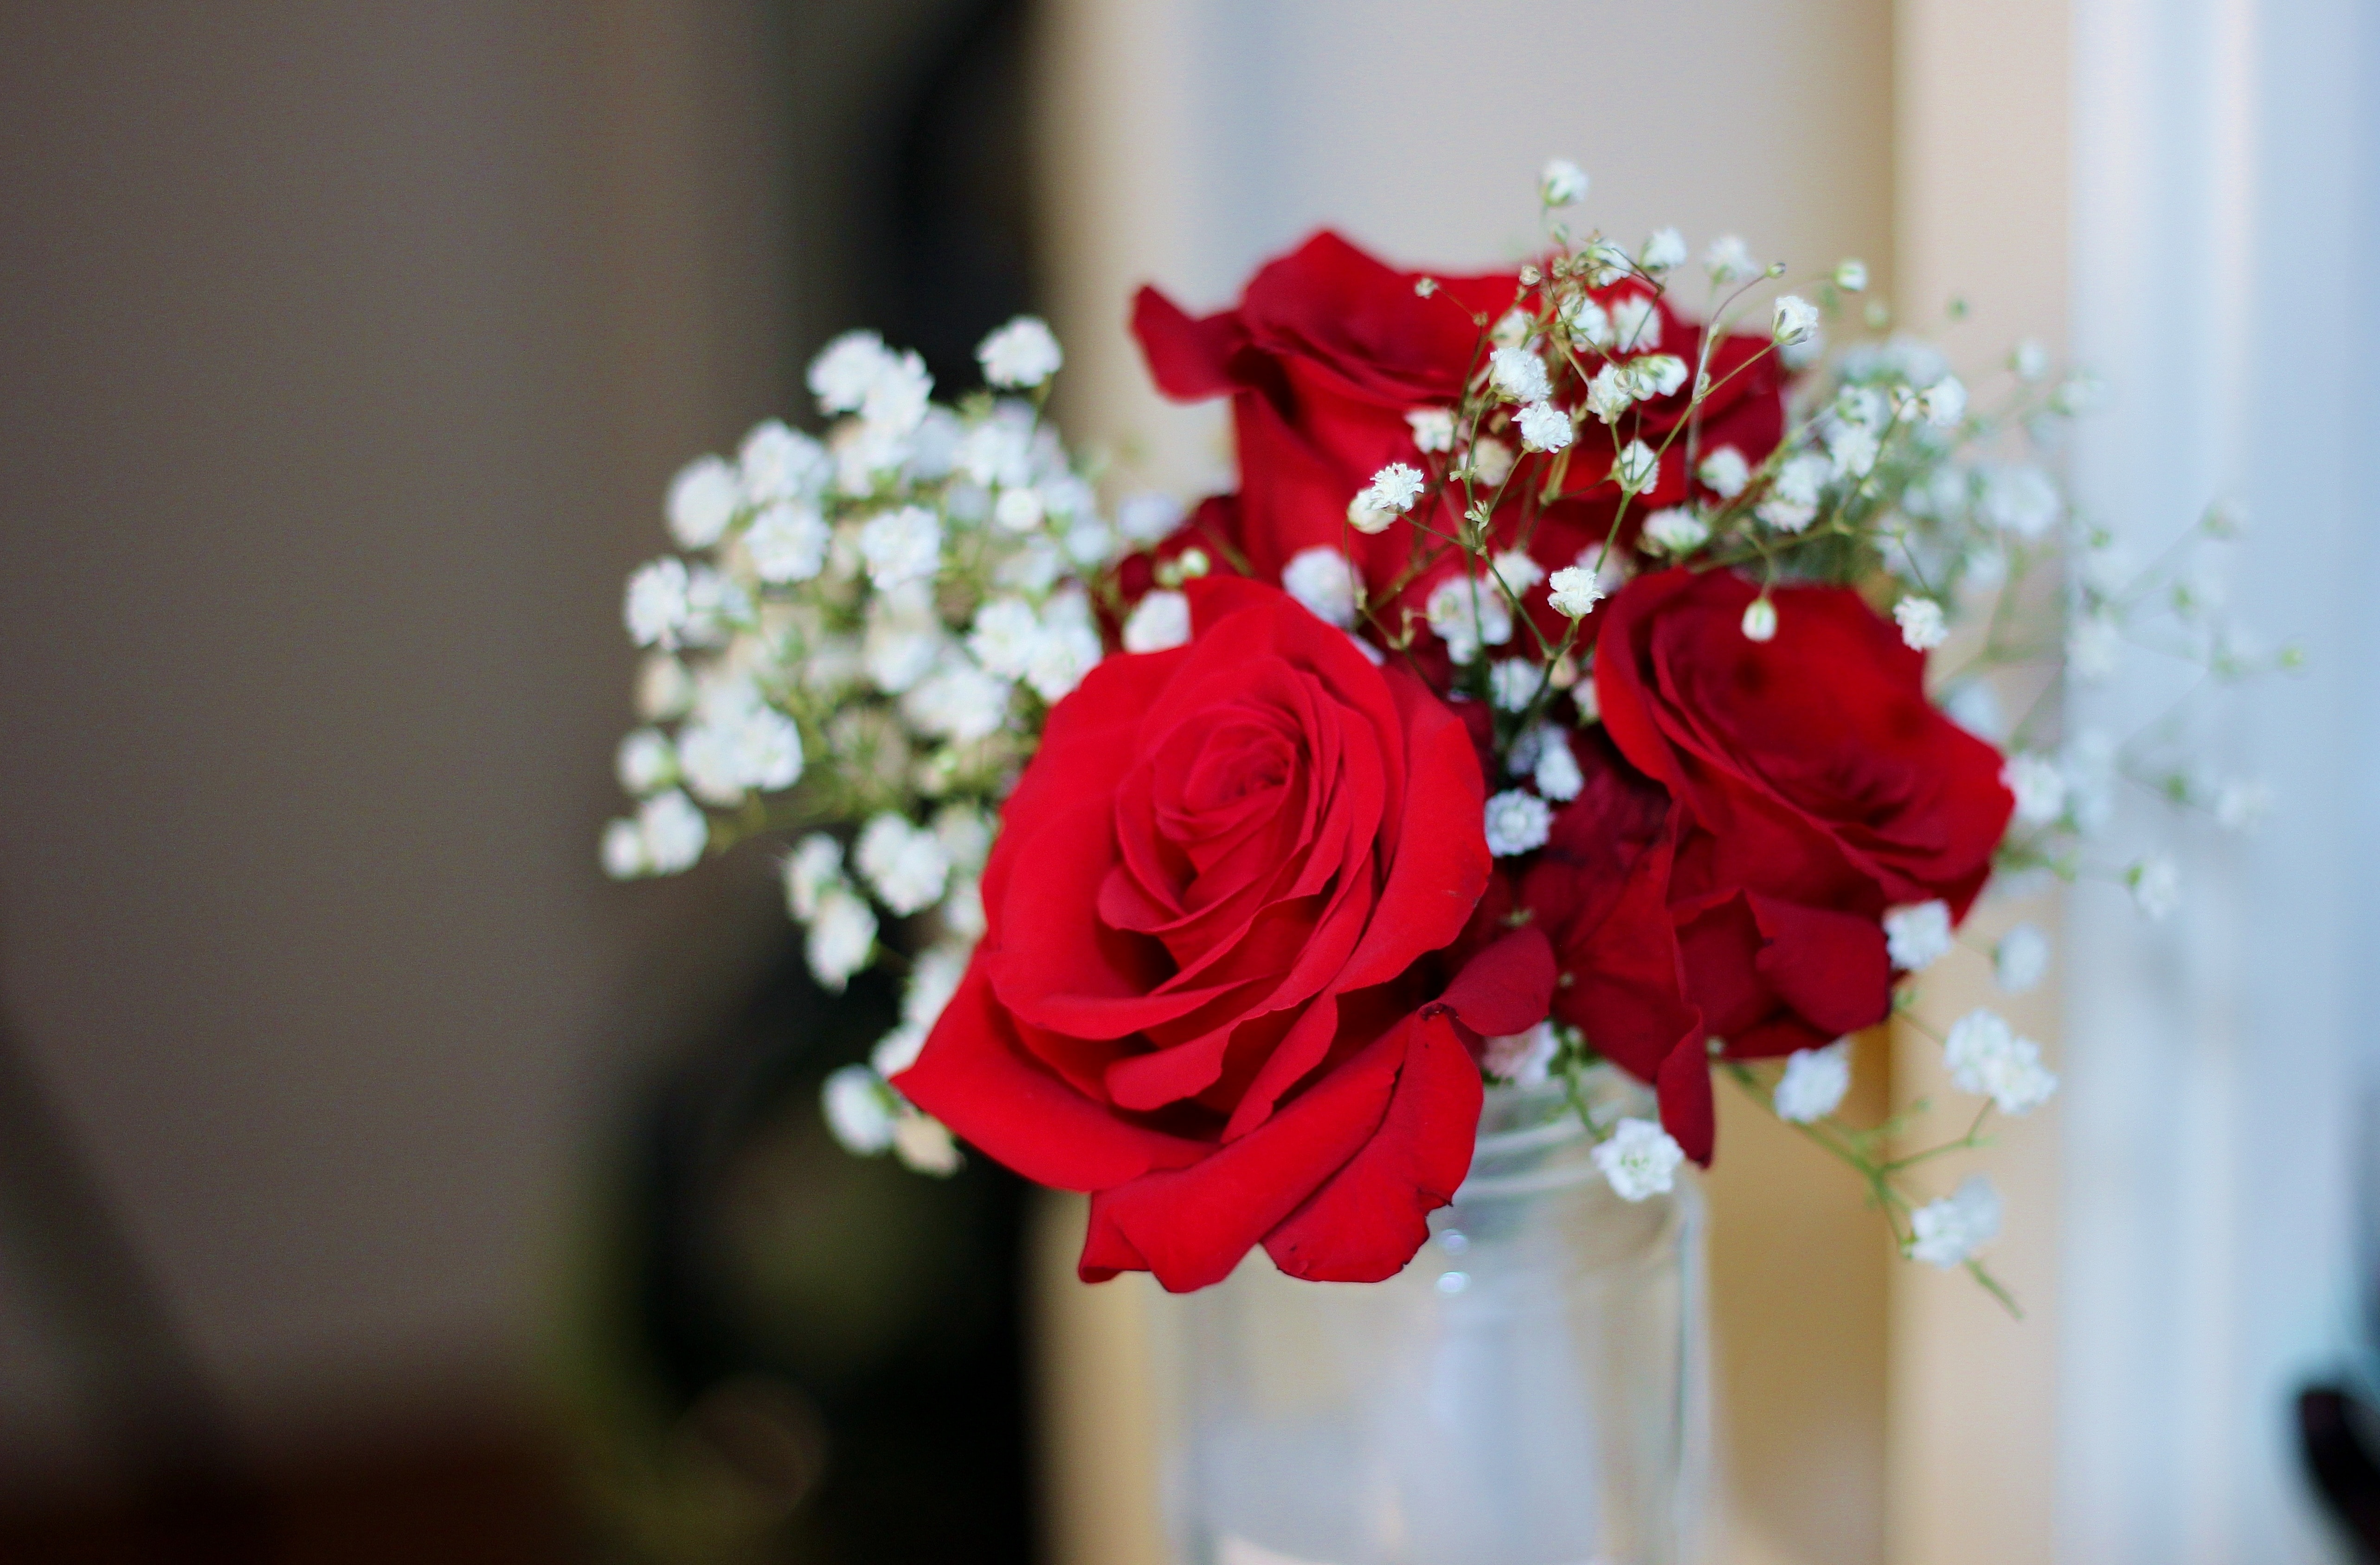 Nature, Floral, Flowers, Bouquet, flower, red